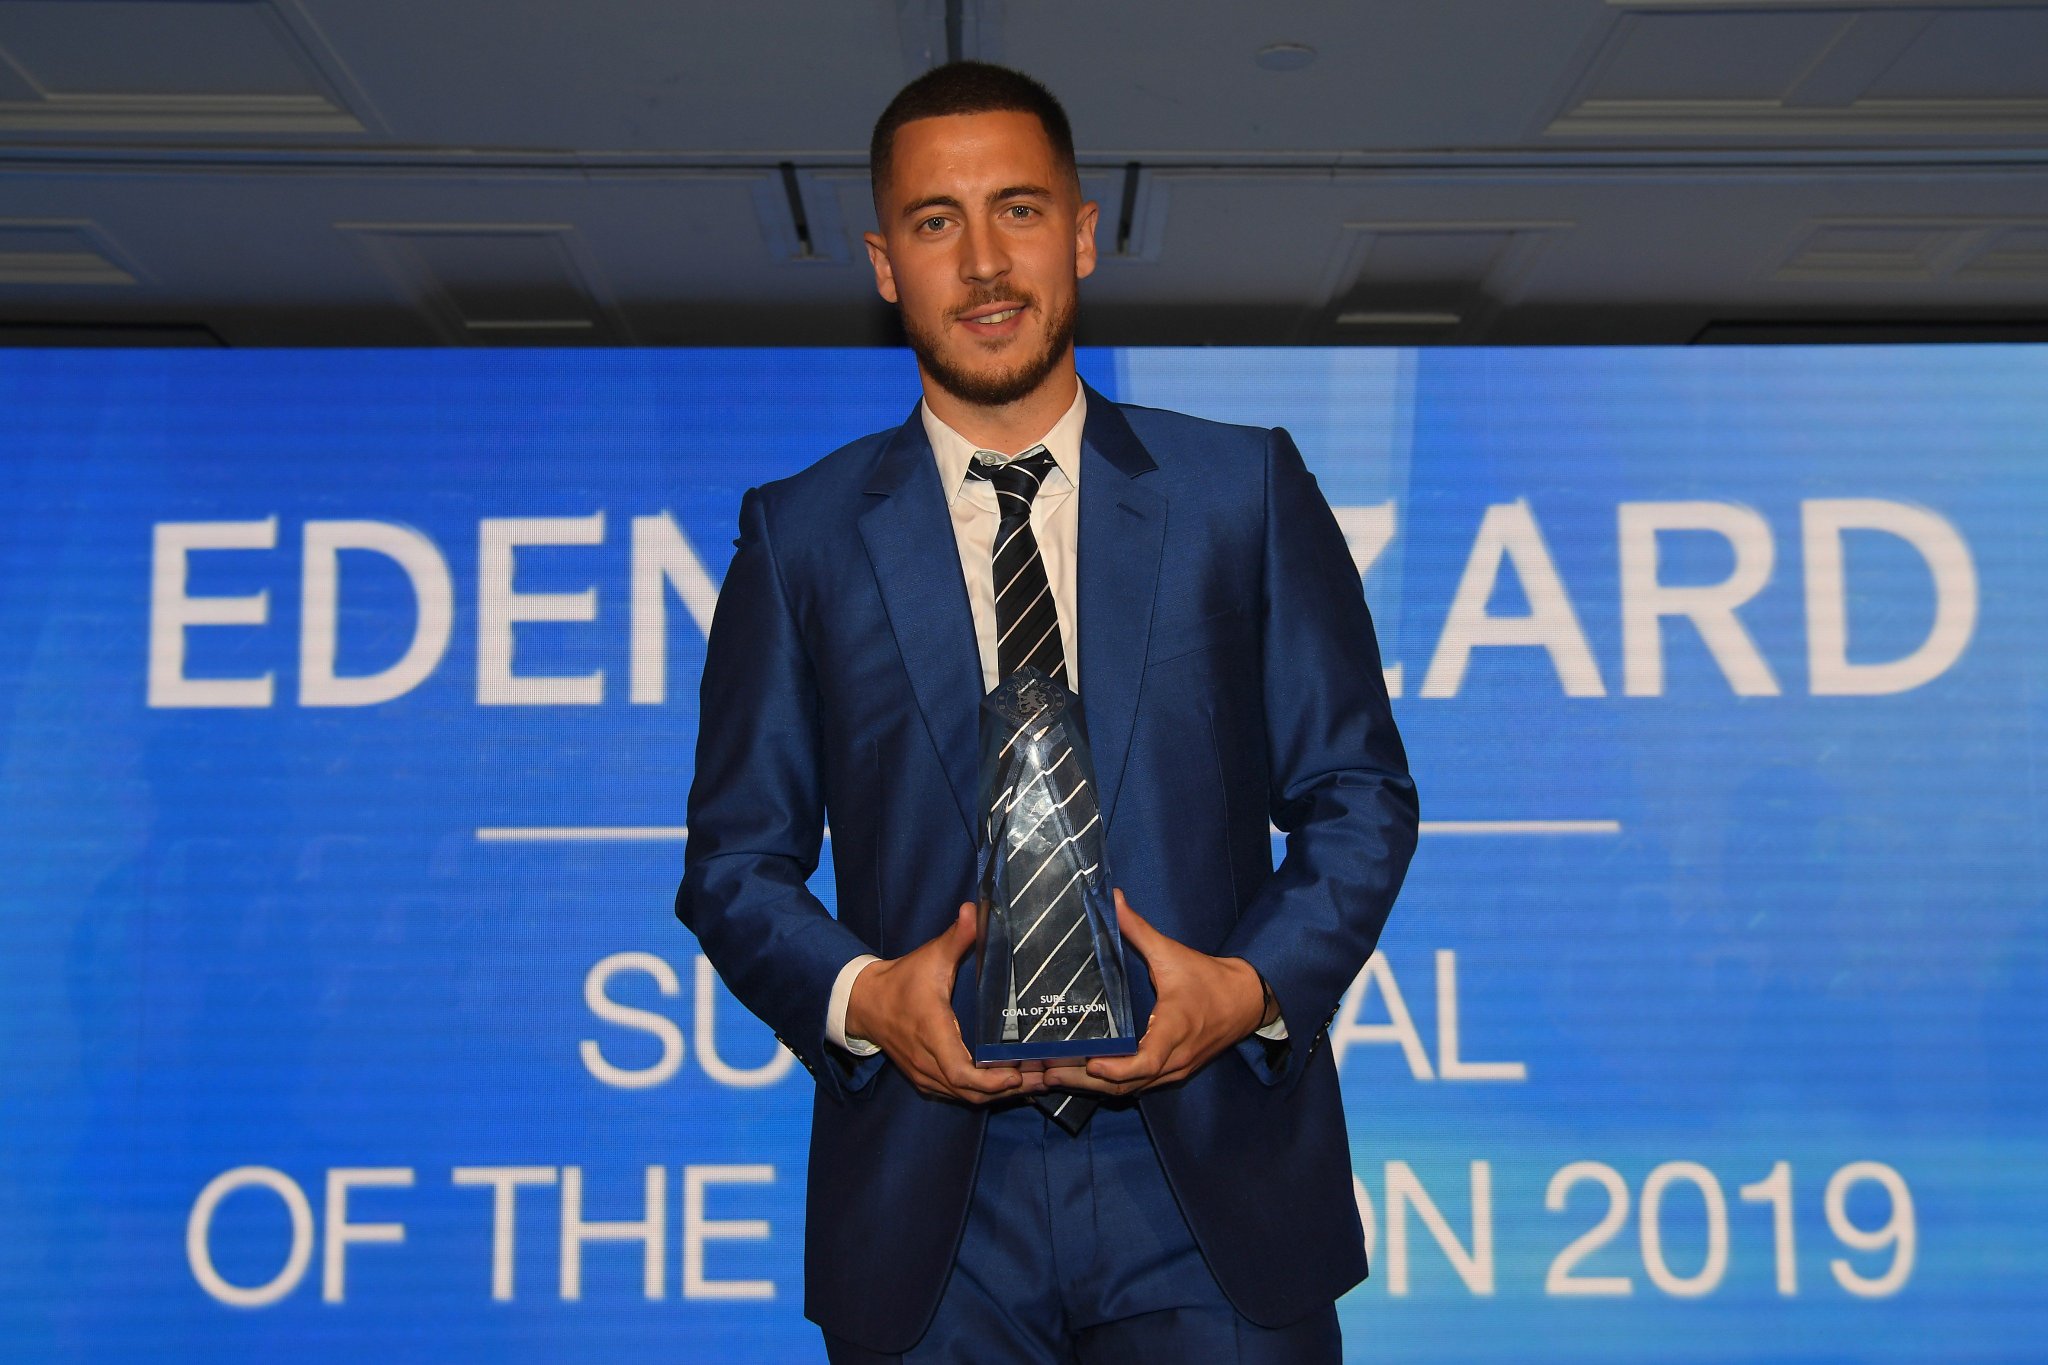 Hazard jokes with Chelsea fans about rejecting Madrid move at club’s award night